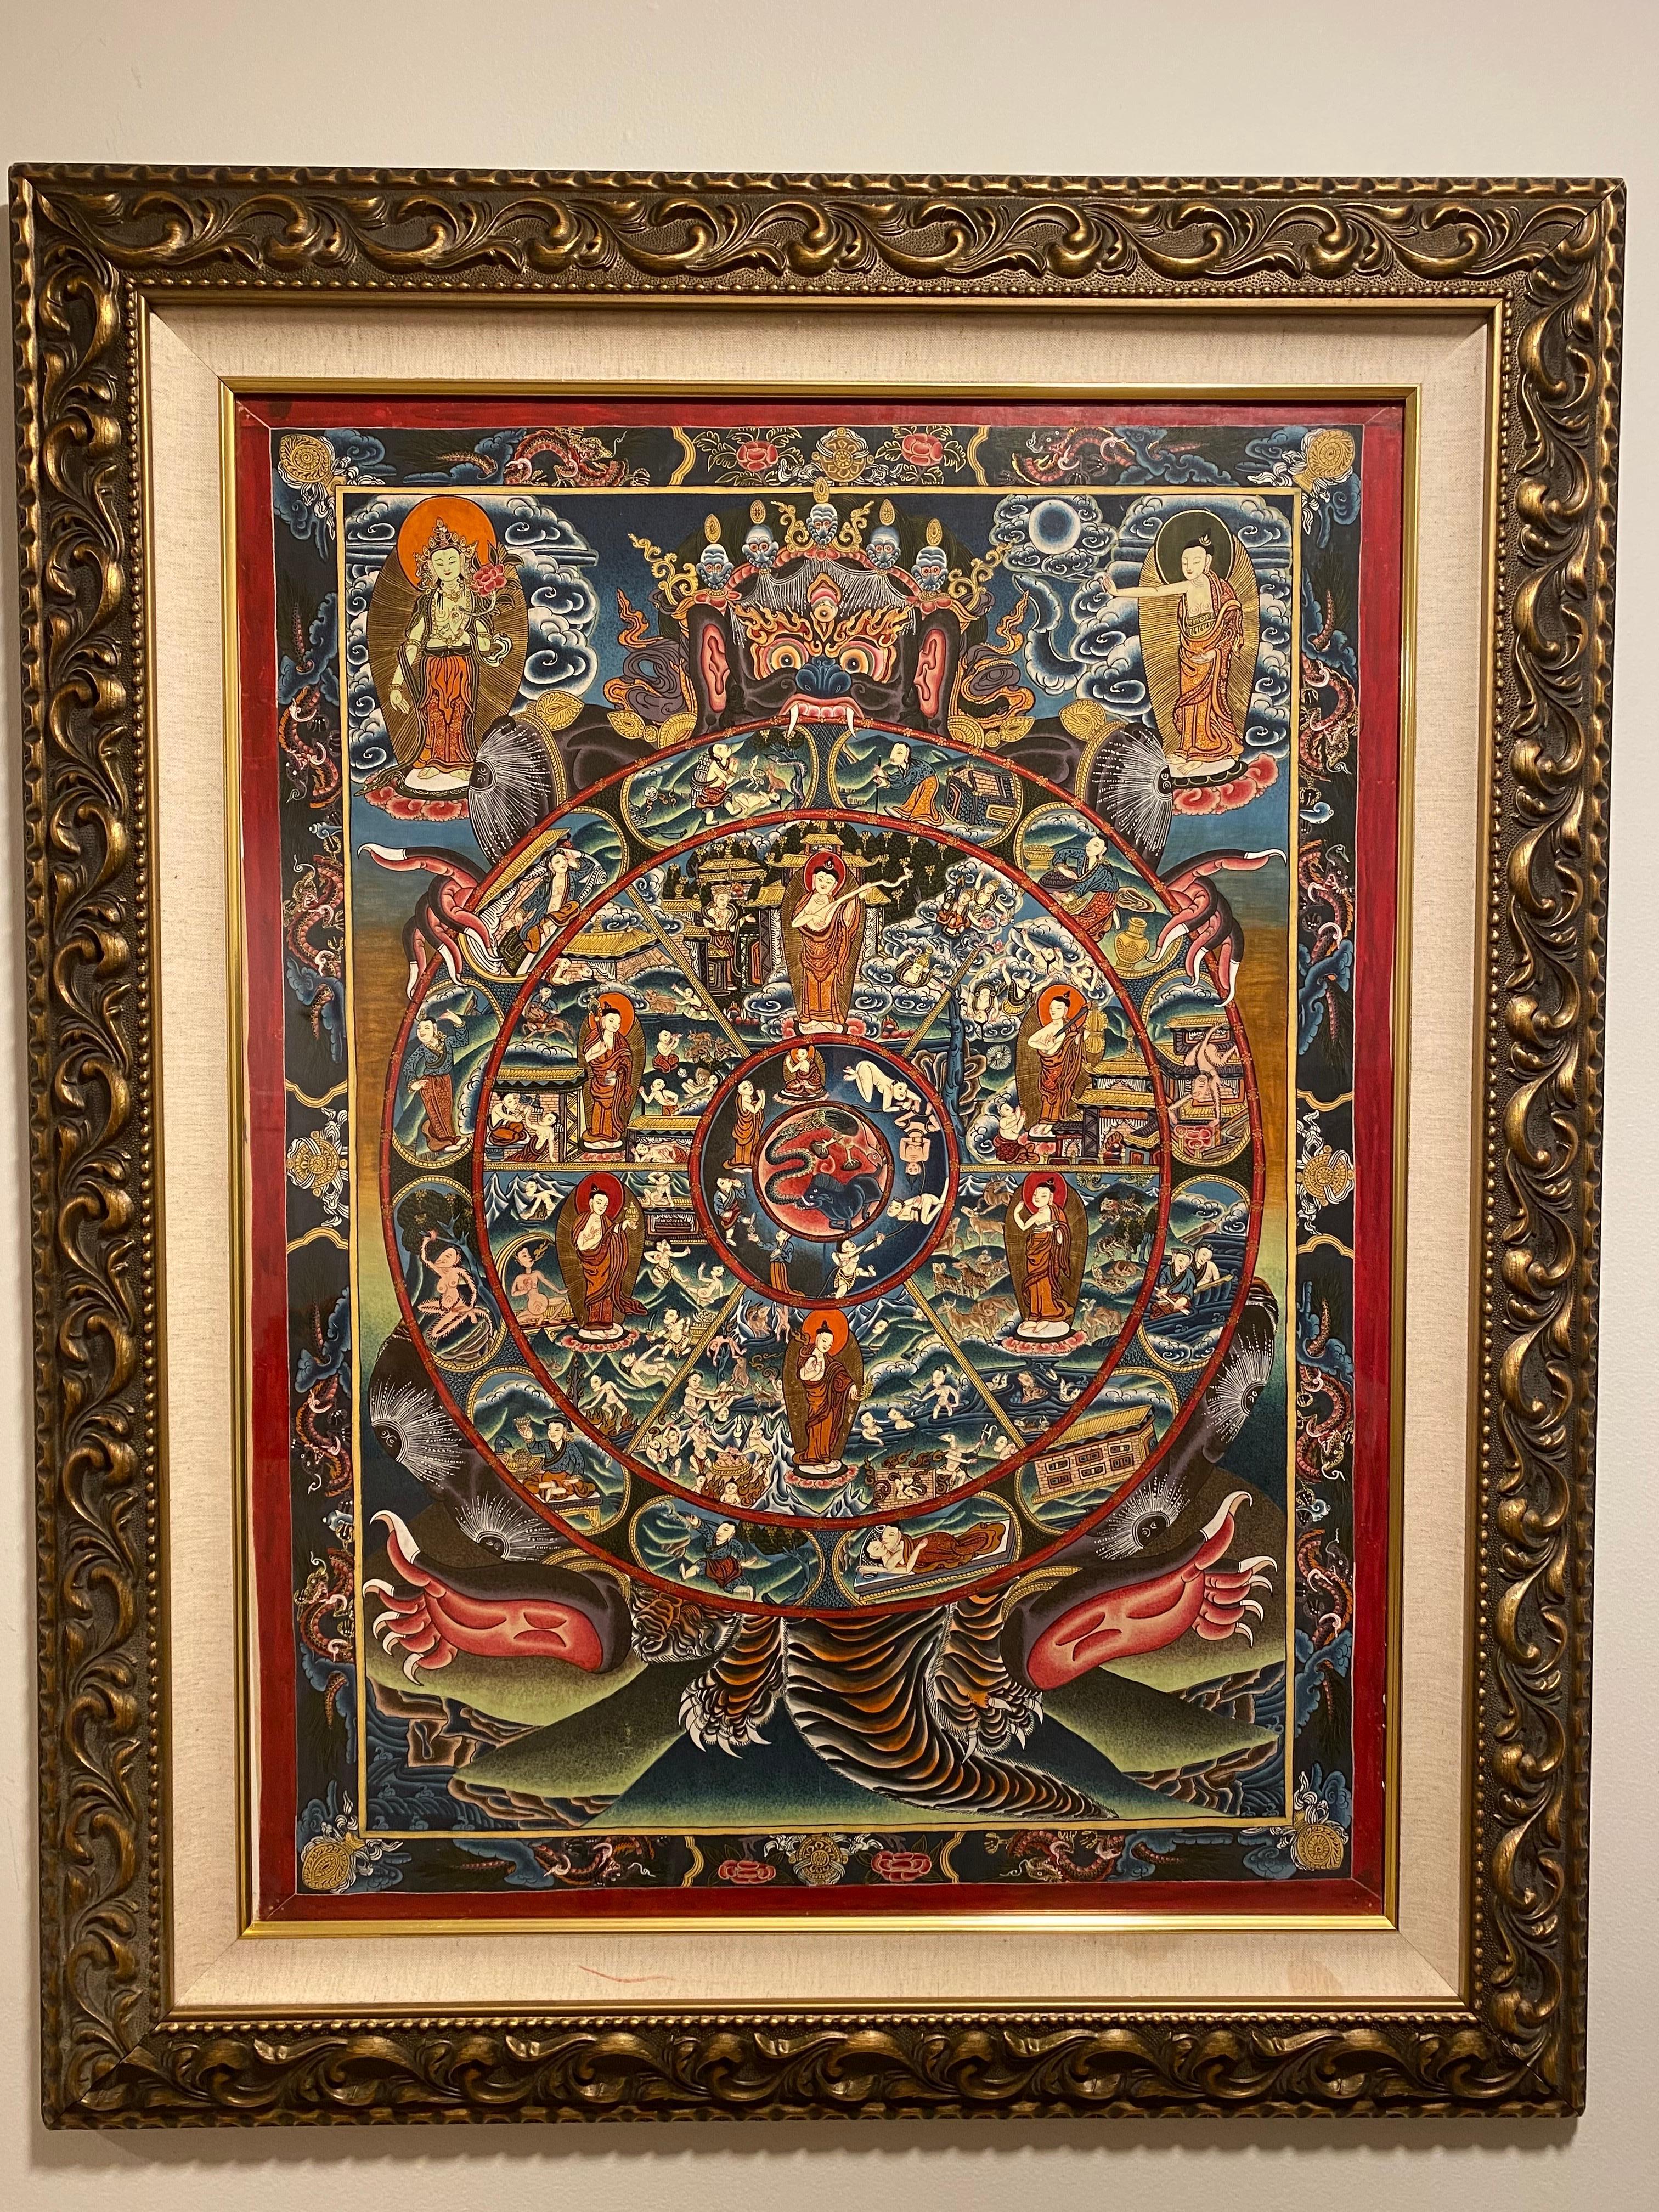 Framed Hand Painted on Canvas Wheel of Life Thangka 24K Gold - Painting by Unknown